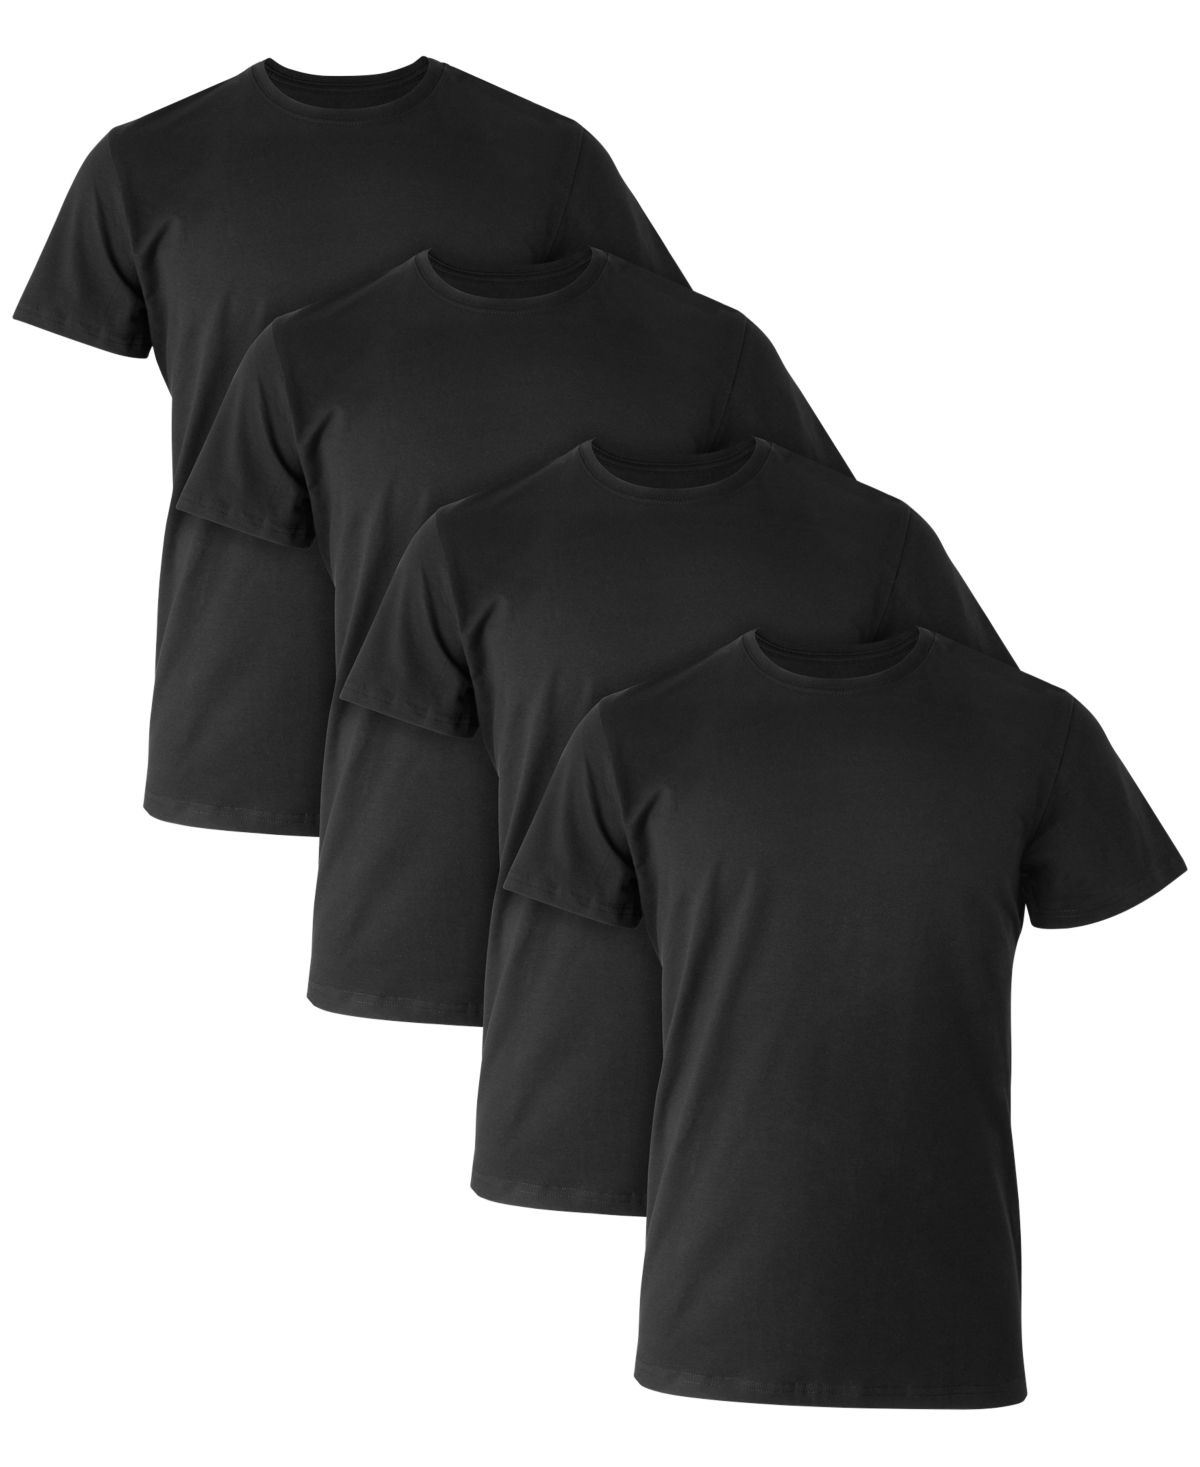 HANES MEN'S ULTIMATE 4-PK. MOISTURE-WICKING STRETCH T-SHIRTS